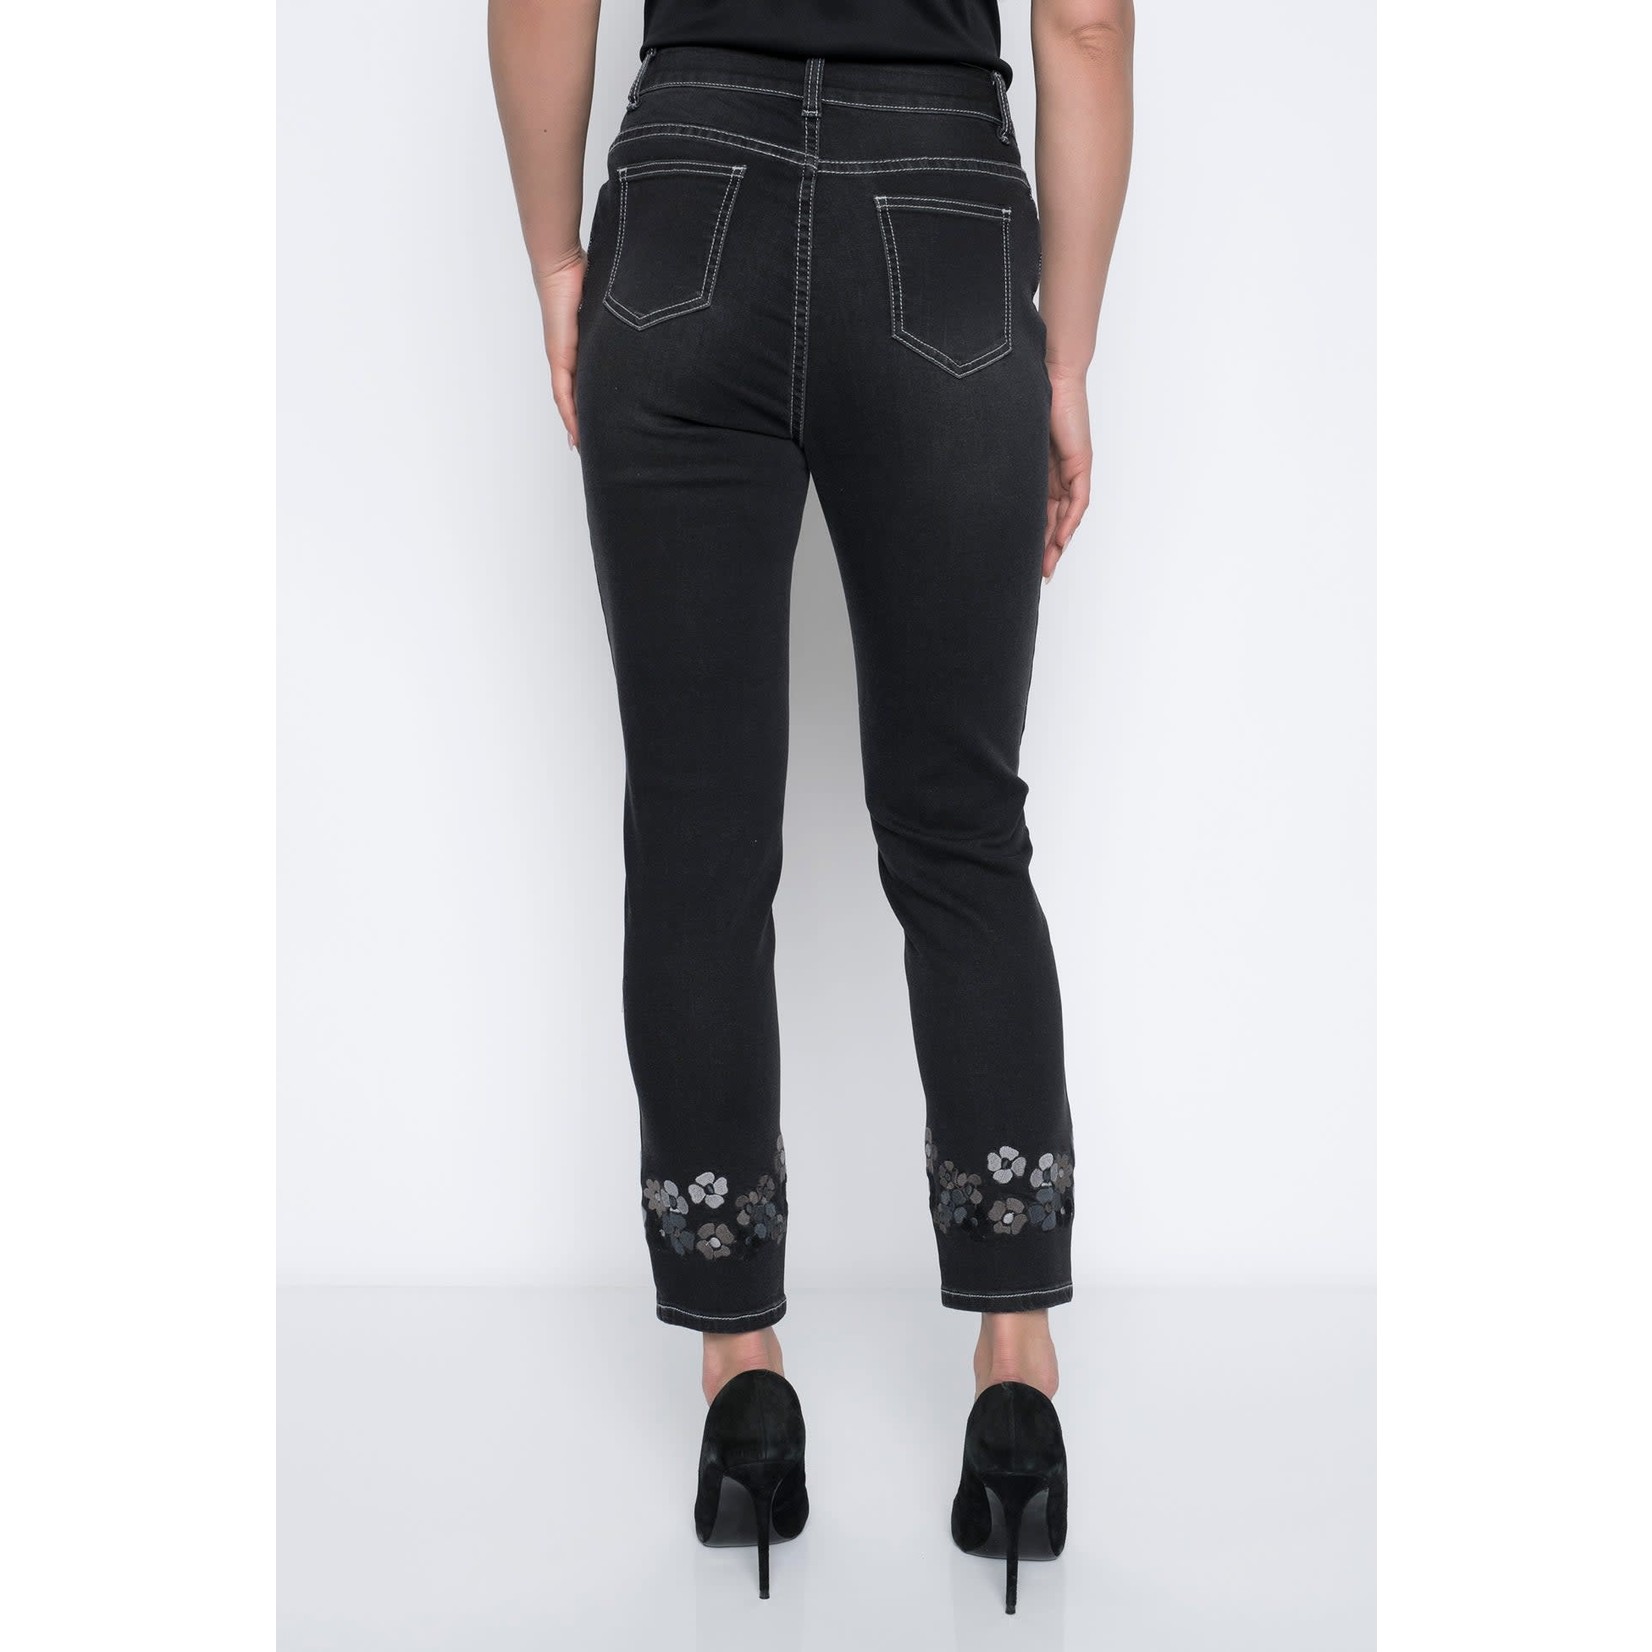 Picadilly Floral Embr Denim Pant in Charcoal